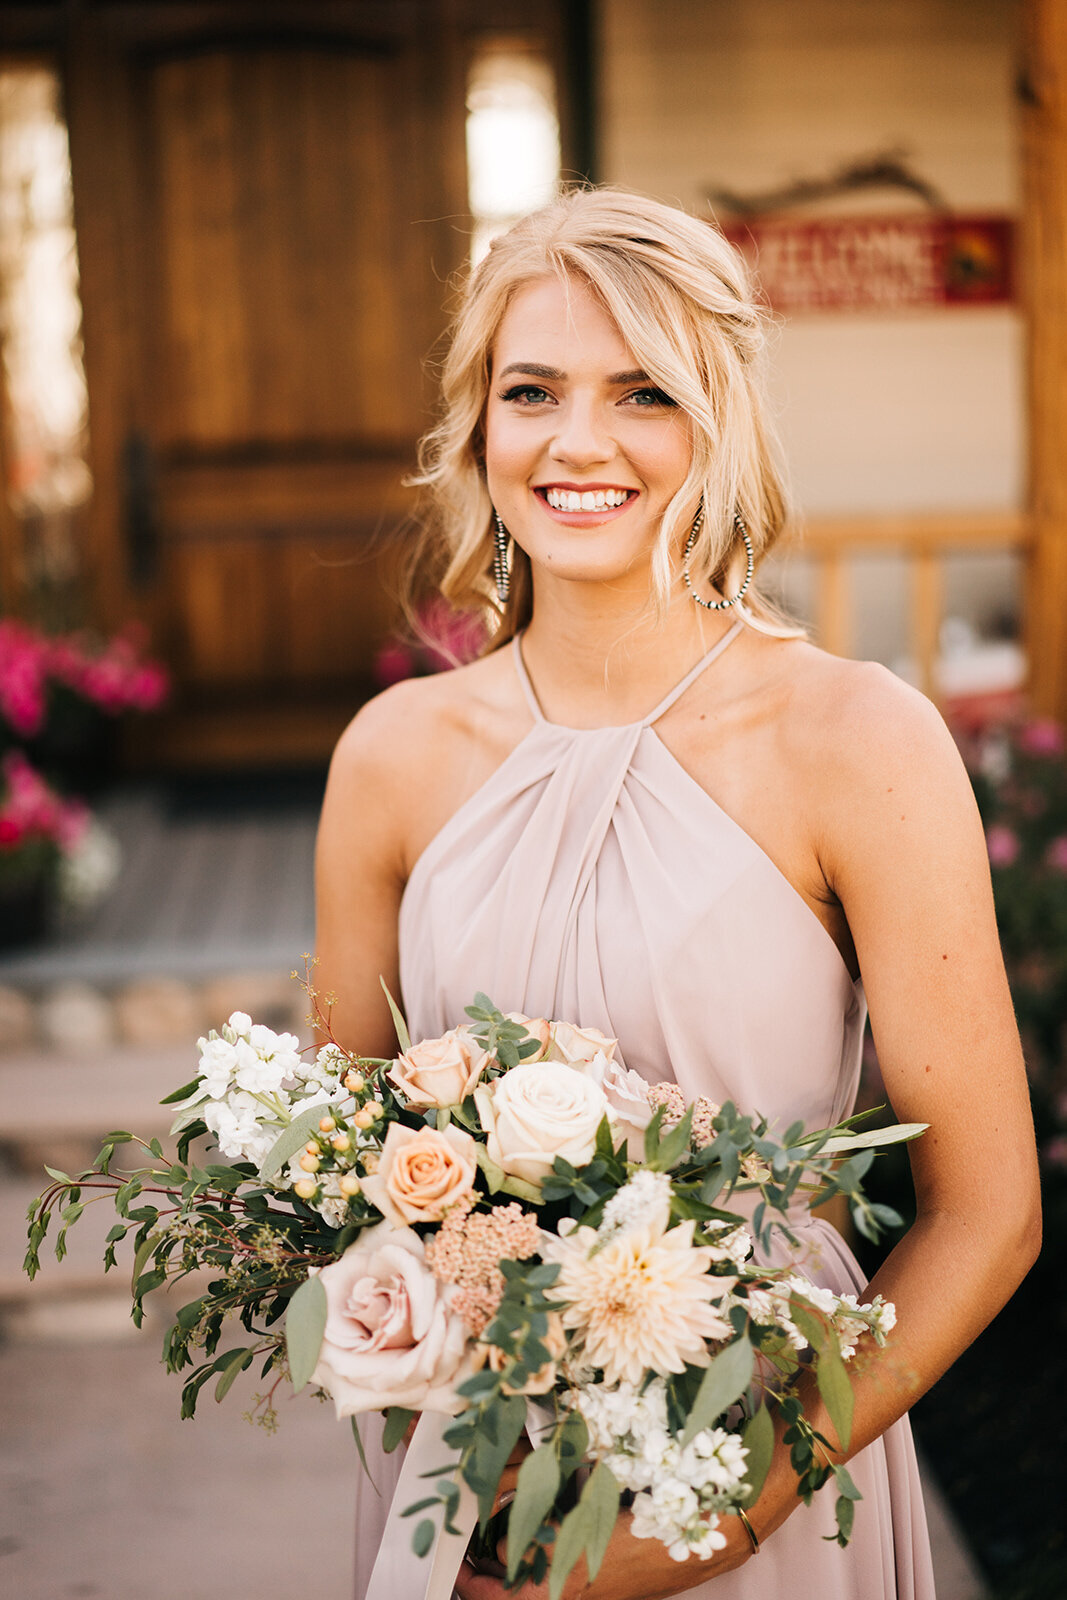 Bridesmaid in pale mauve dress holding a bouquet of roses, dahlias and stock with eucalyptus